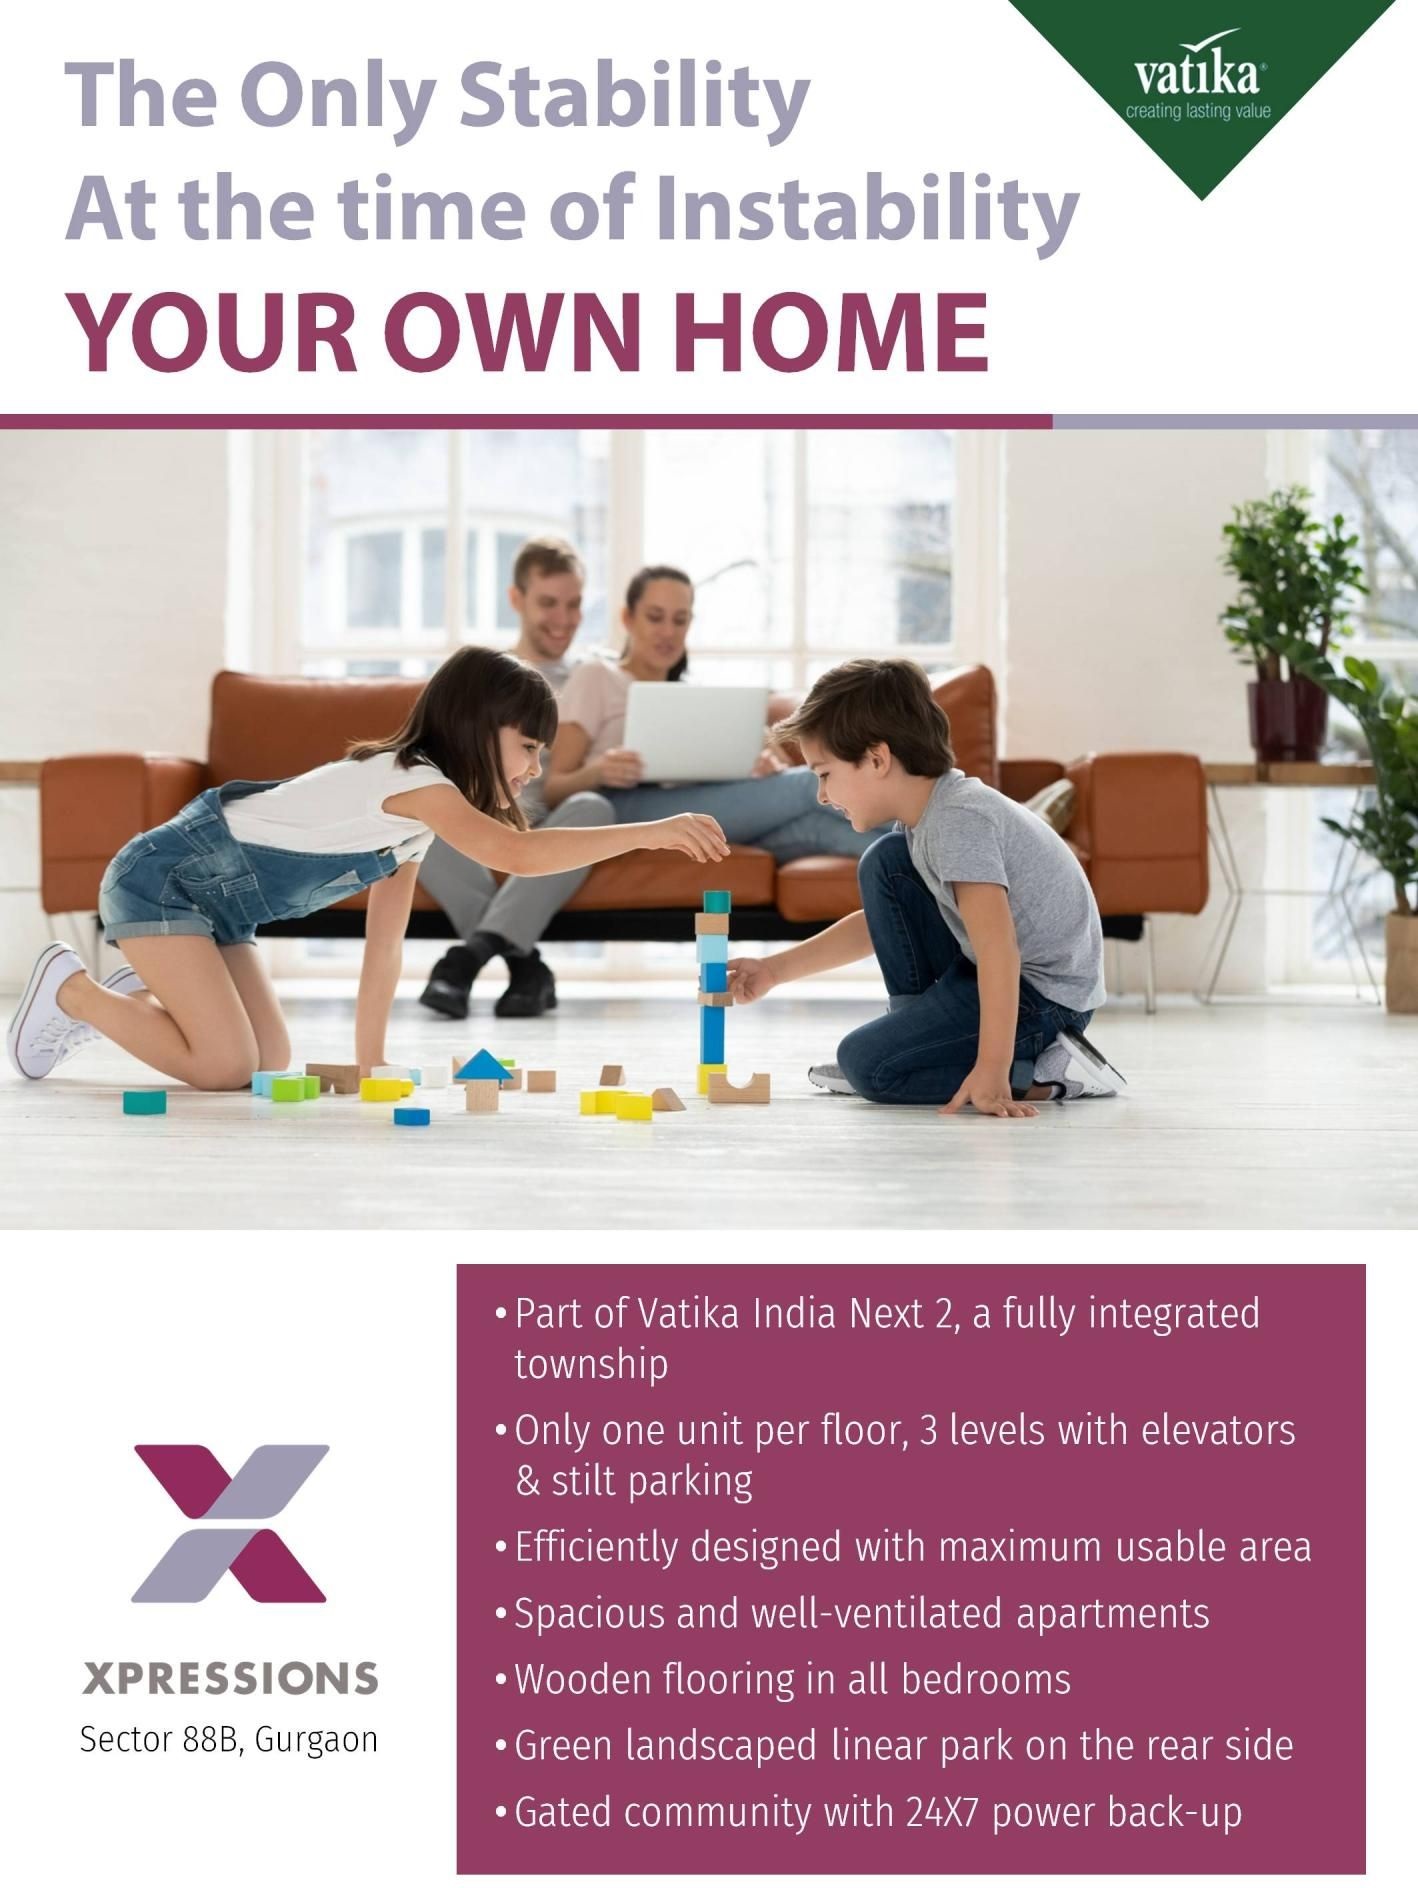 A fully integrated township is Vatika Xpressions, Sector 88B, Dwarka Expressway, Gurgaon Update